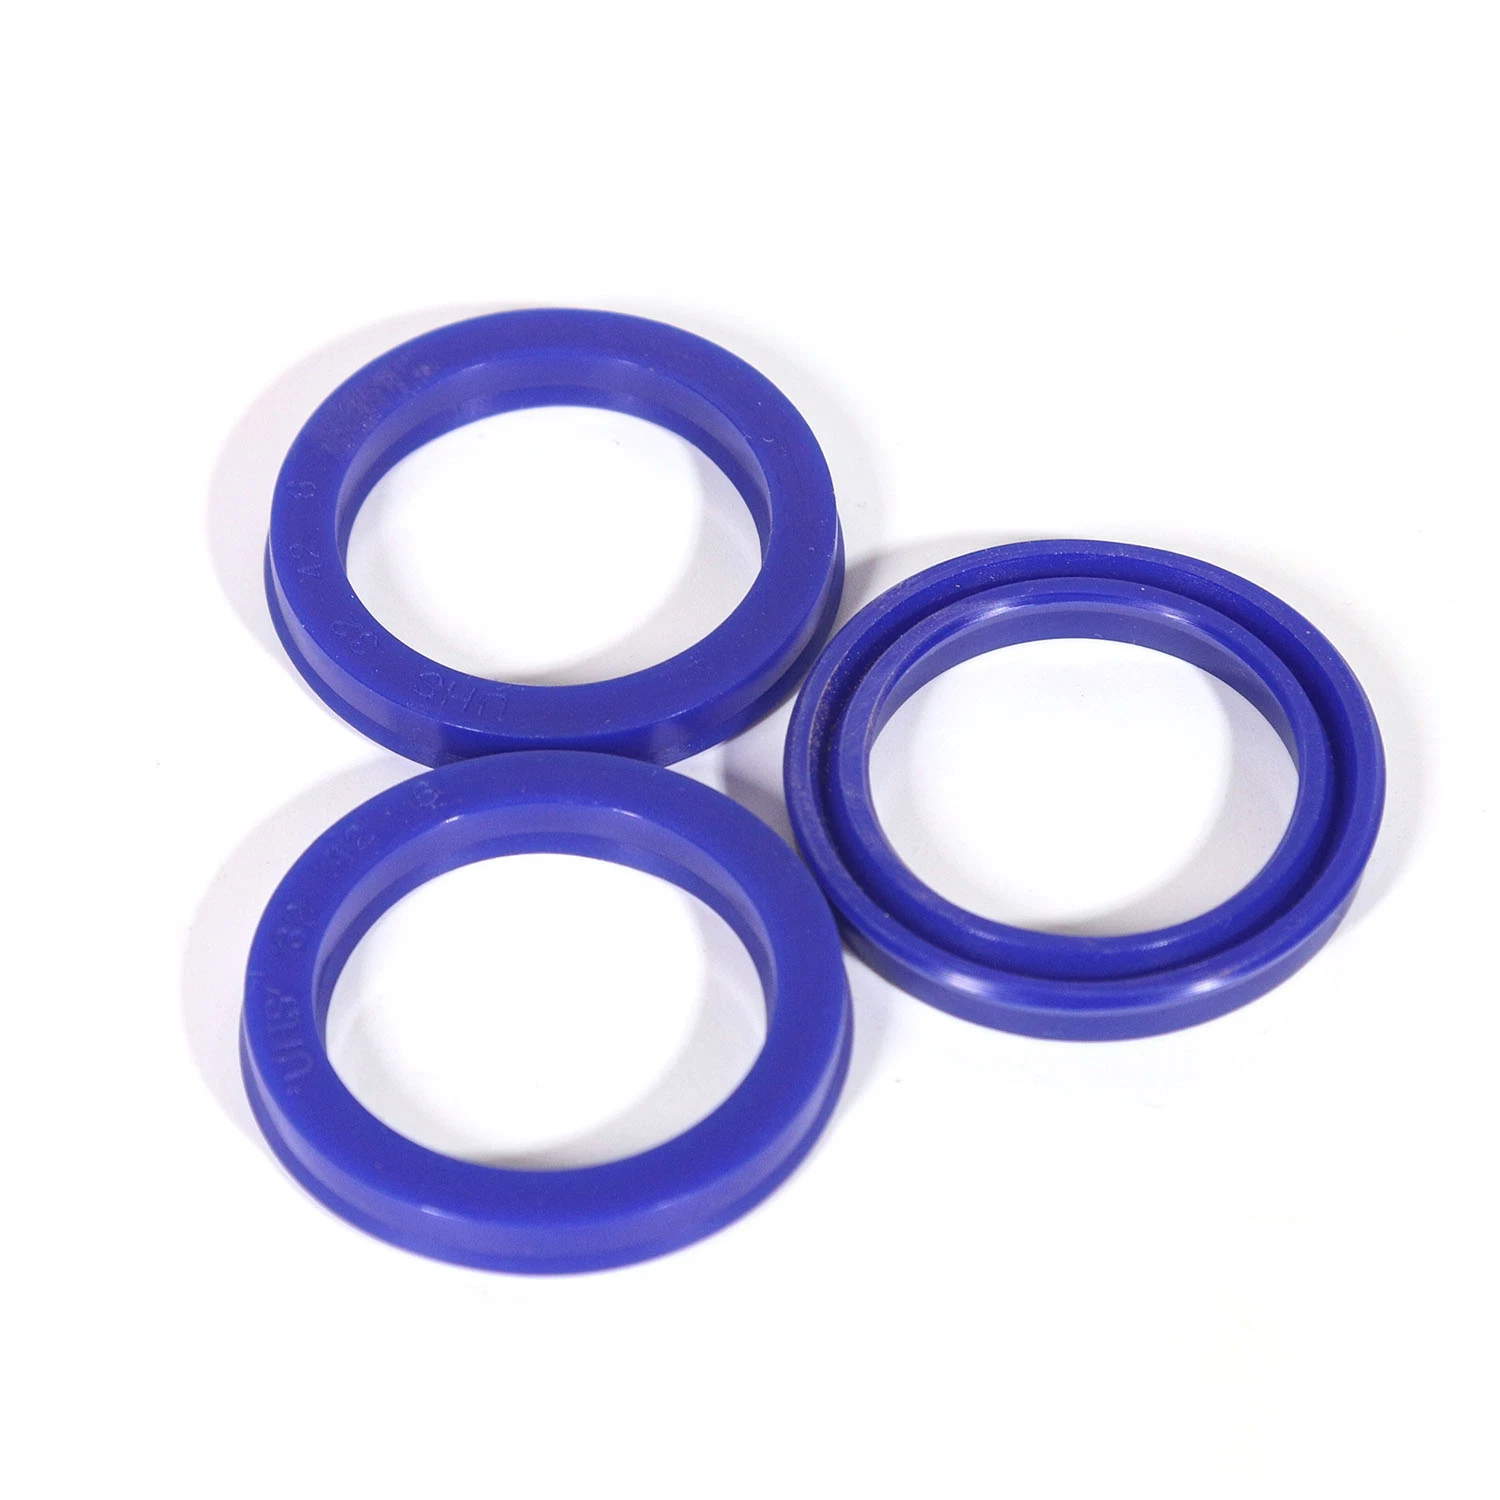 Polyurethane Sealing Ring Oil Seal High Pressure and Wear Resistance Lip Type Un Oil Seal Y Type Hydraulic Cylinder Seal Ring